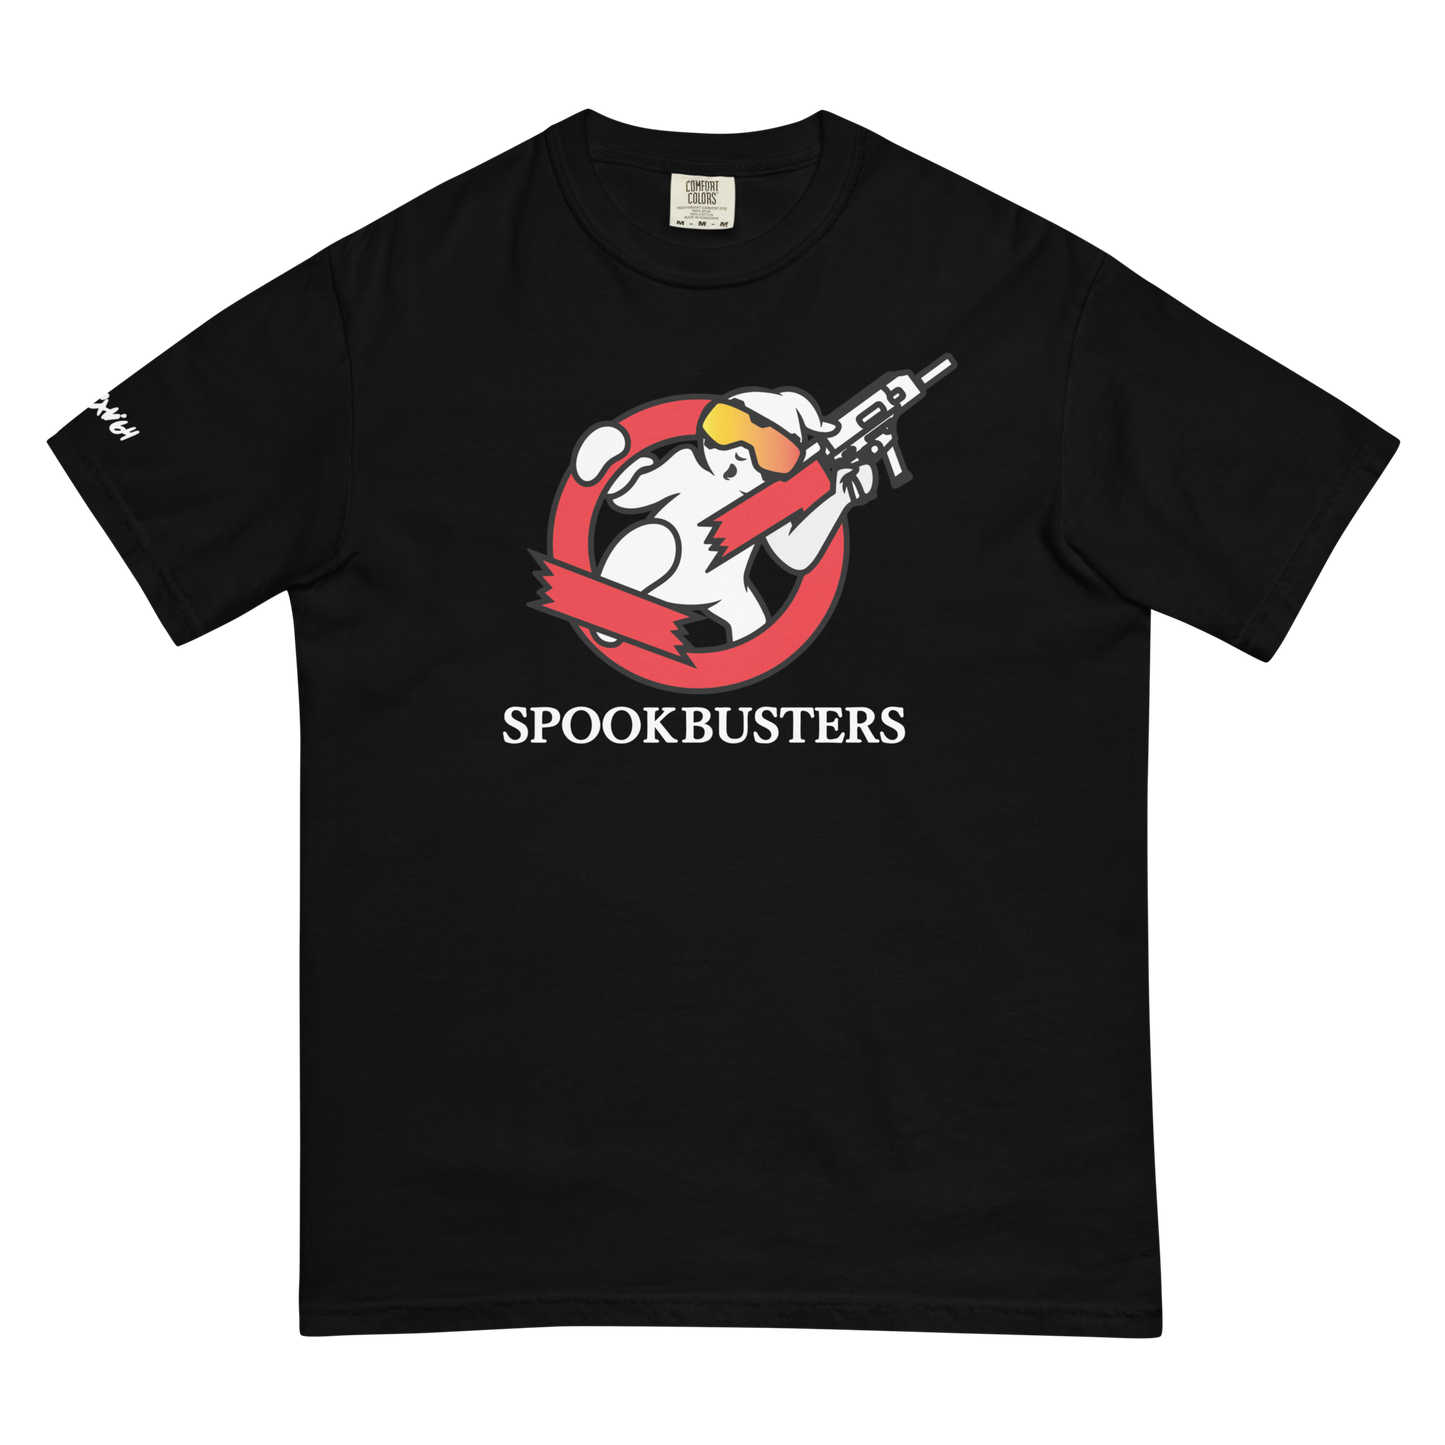 Spook busters